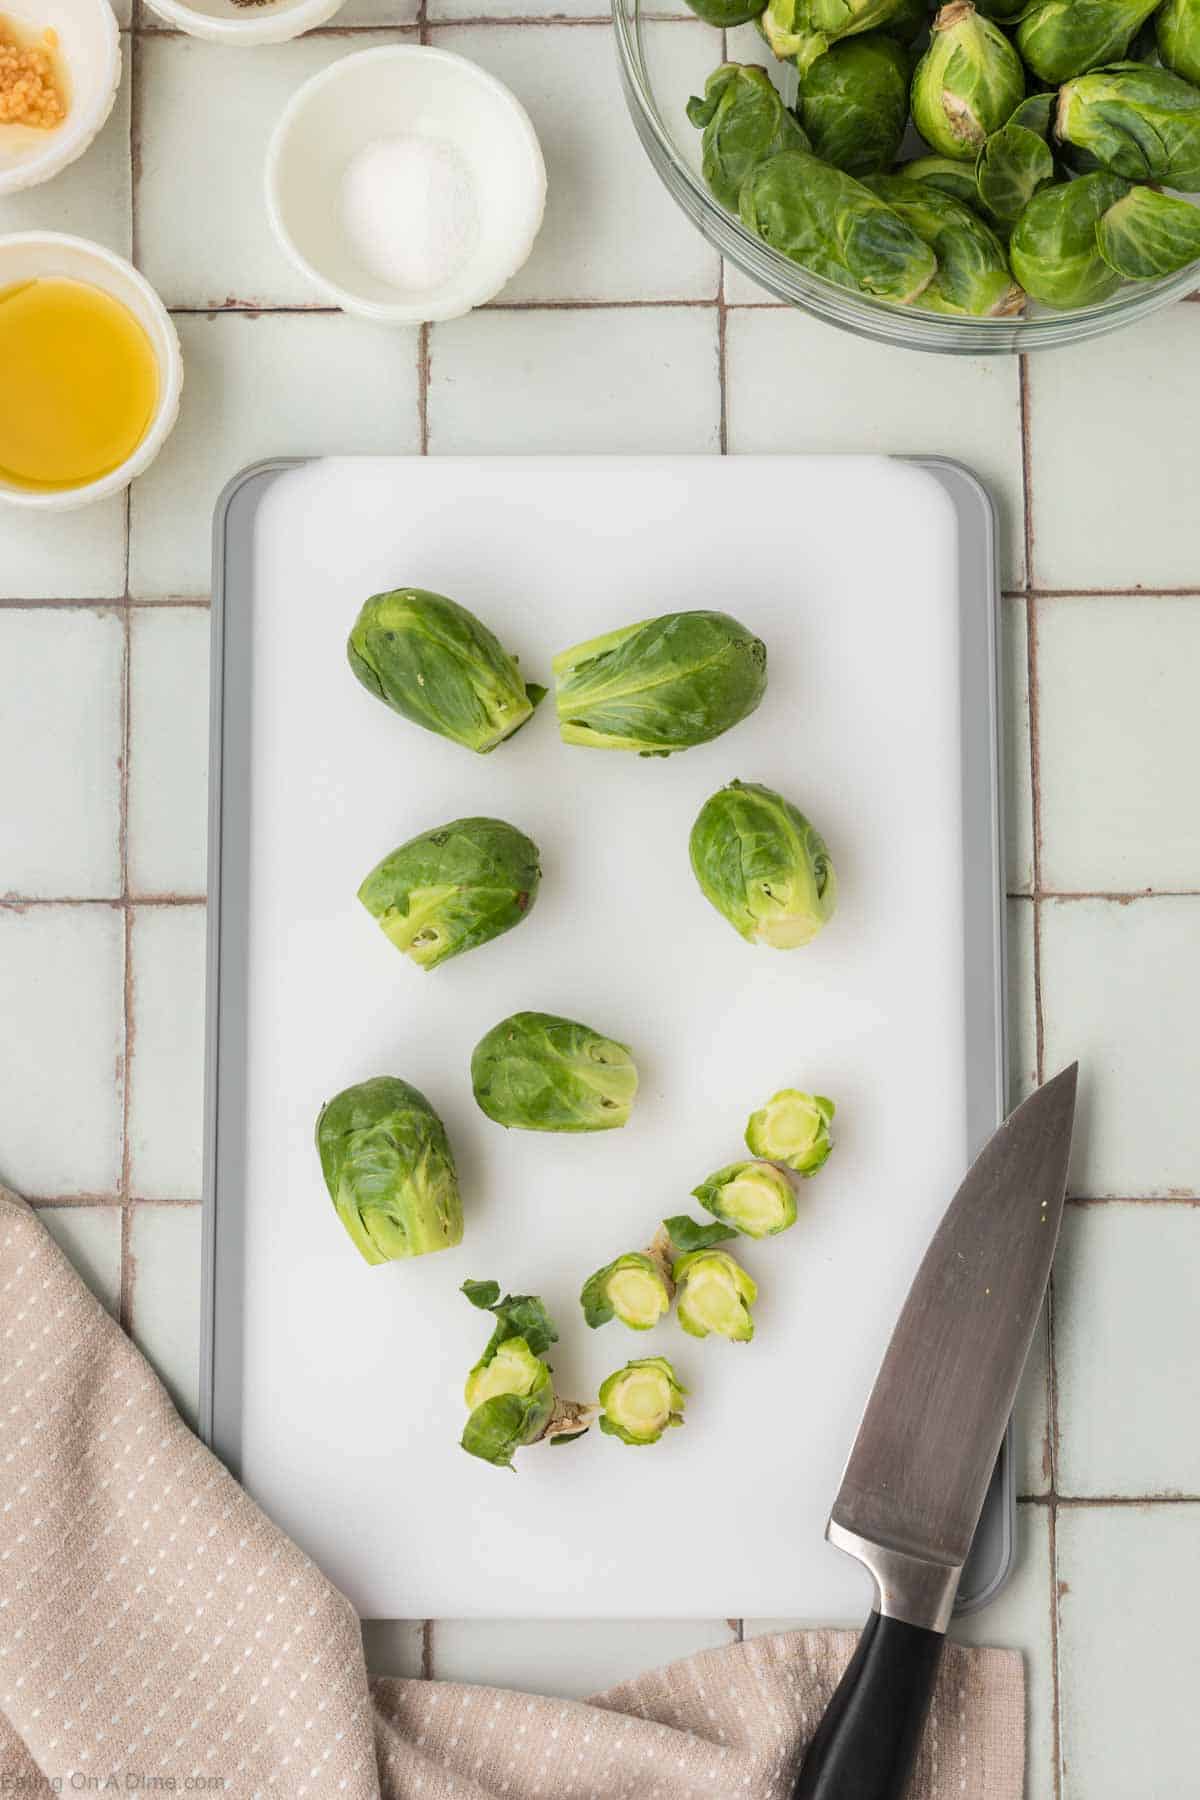 A cutting board with trimmed Brussels sprouts and their stalk ends. A knife lies to the right, with a beige cloth nearby. On the top right, a bowl contains more Brussels sprouts ready for an air fryer Brussel sprouts recipe. Small bowls of seasoning and oil are in the top left corner on a tiled surface.